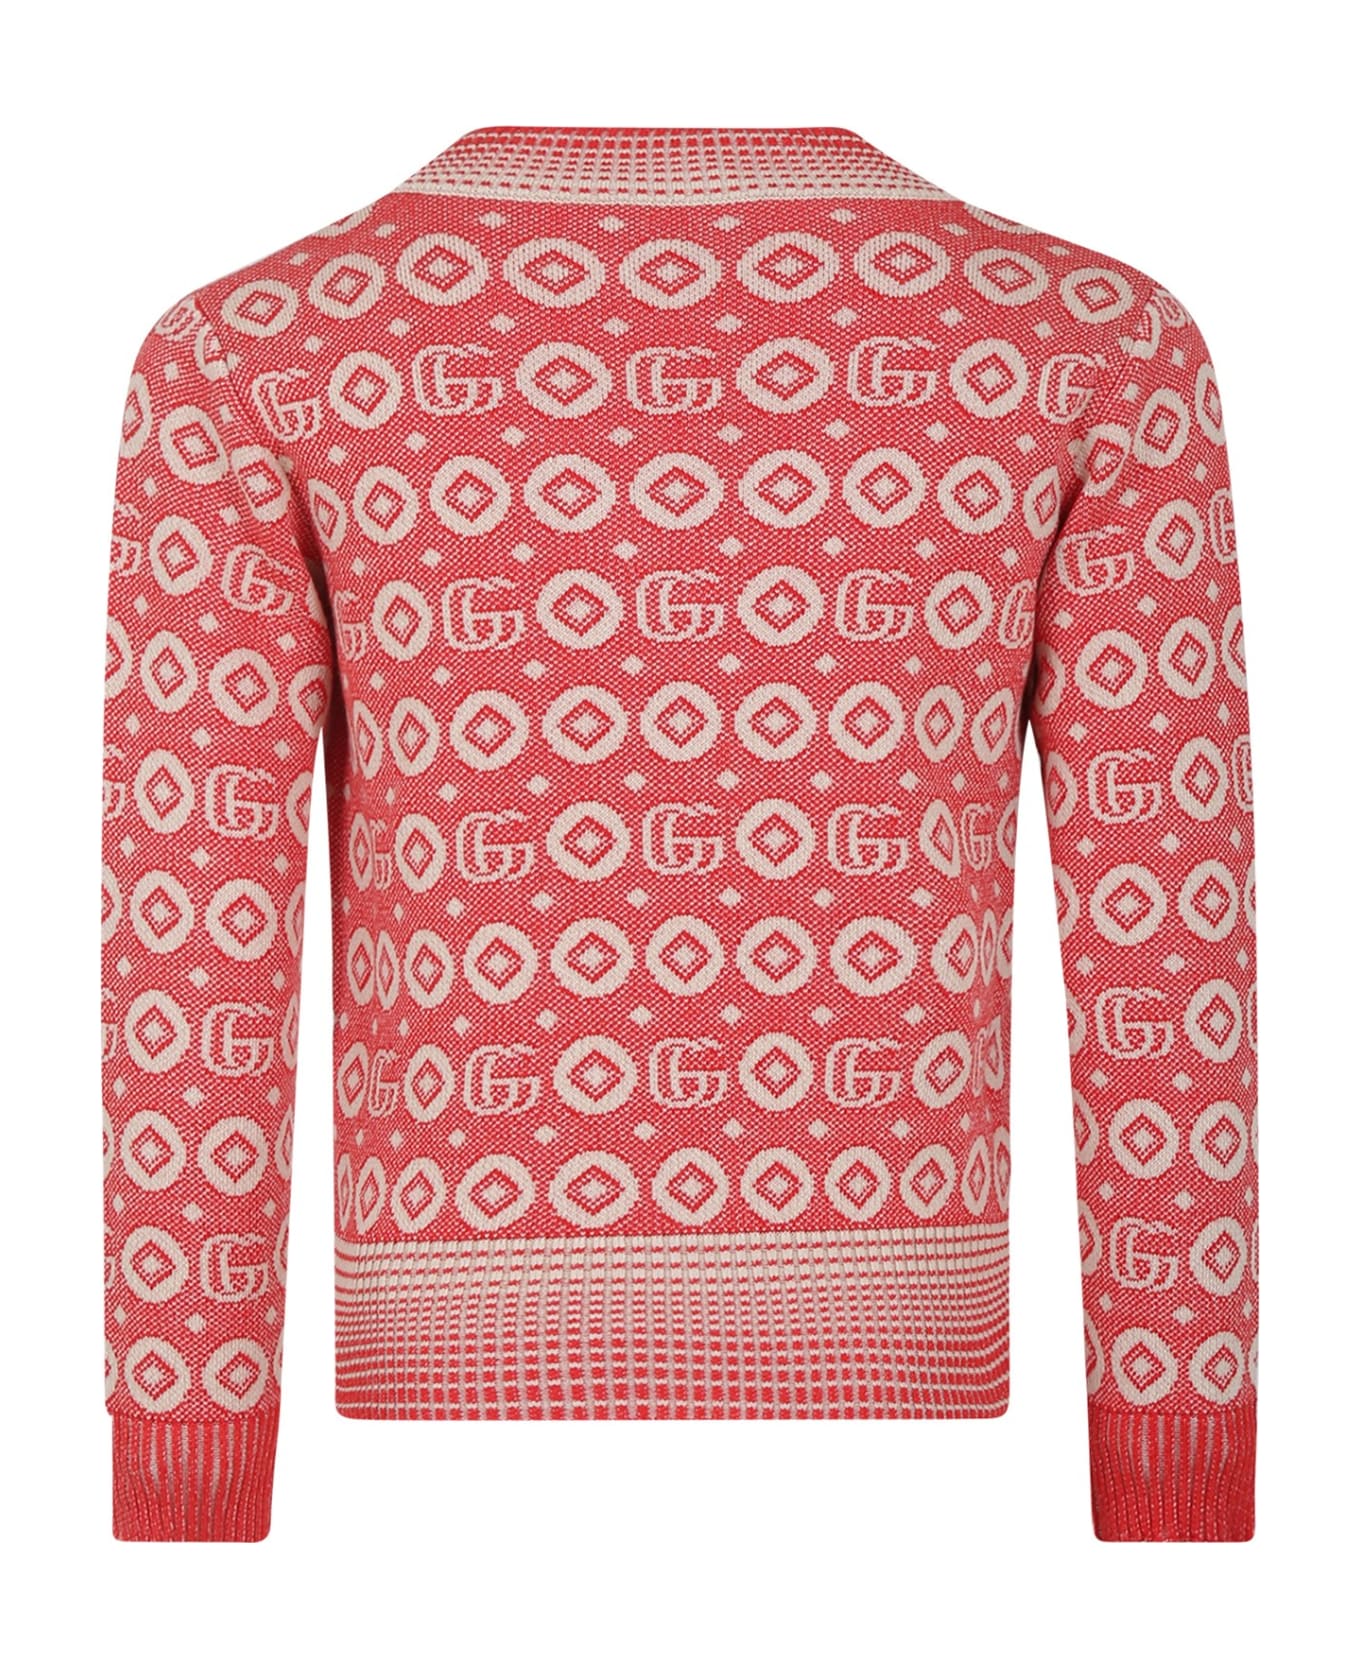 Gucci Red Sweater For Boy With Double G - Red